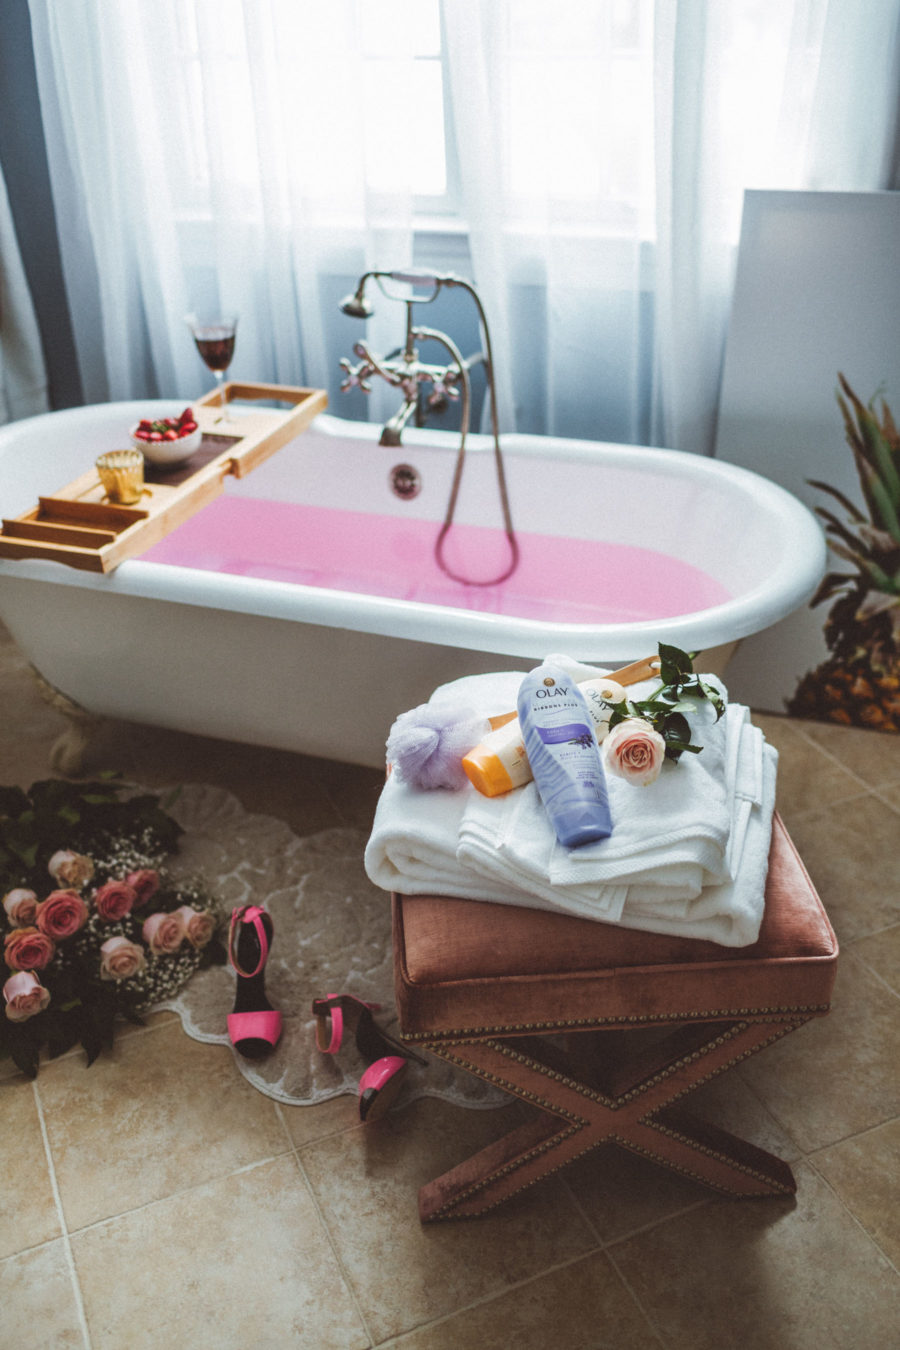 essential elements of the perfect staycation - olay // Notjessfashion.com